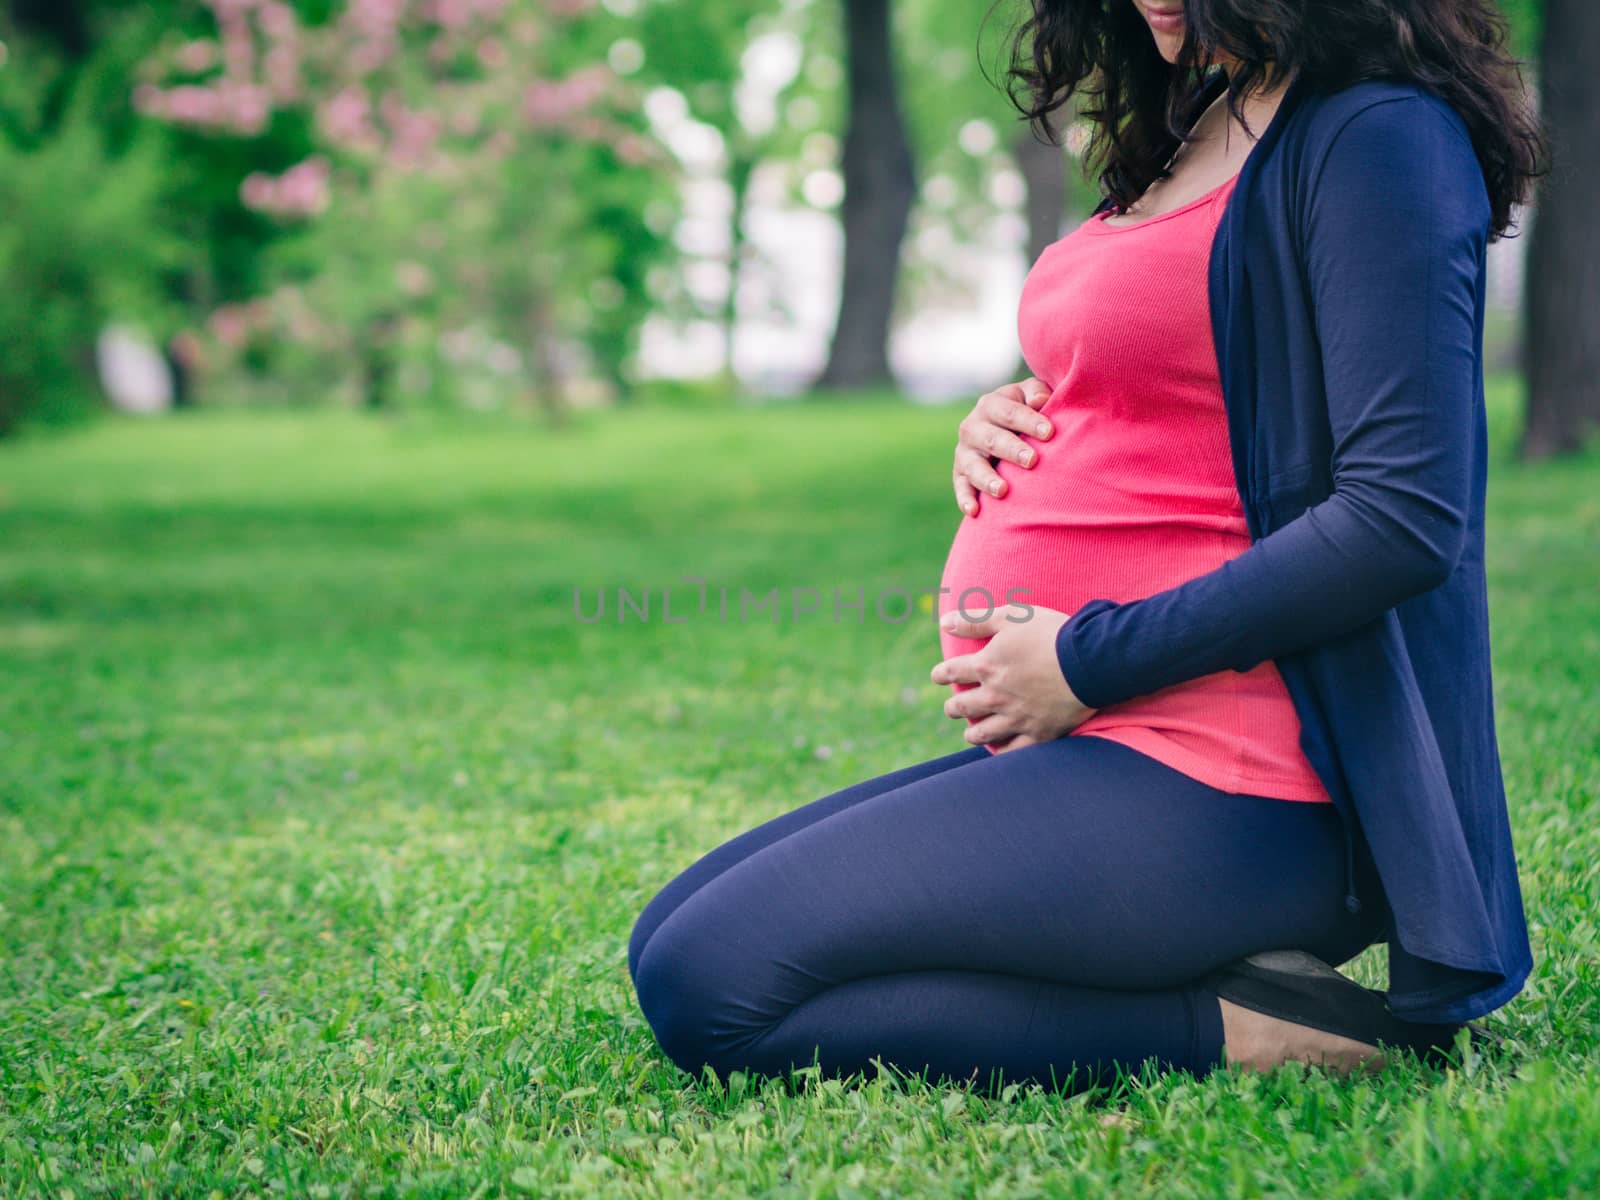 Close up view of pregnant woman siting on grass in park. Hand on abdomen. Copy space.